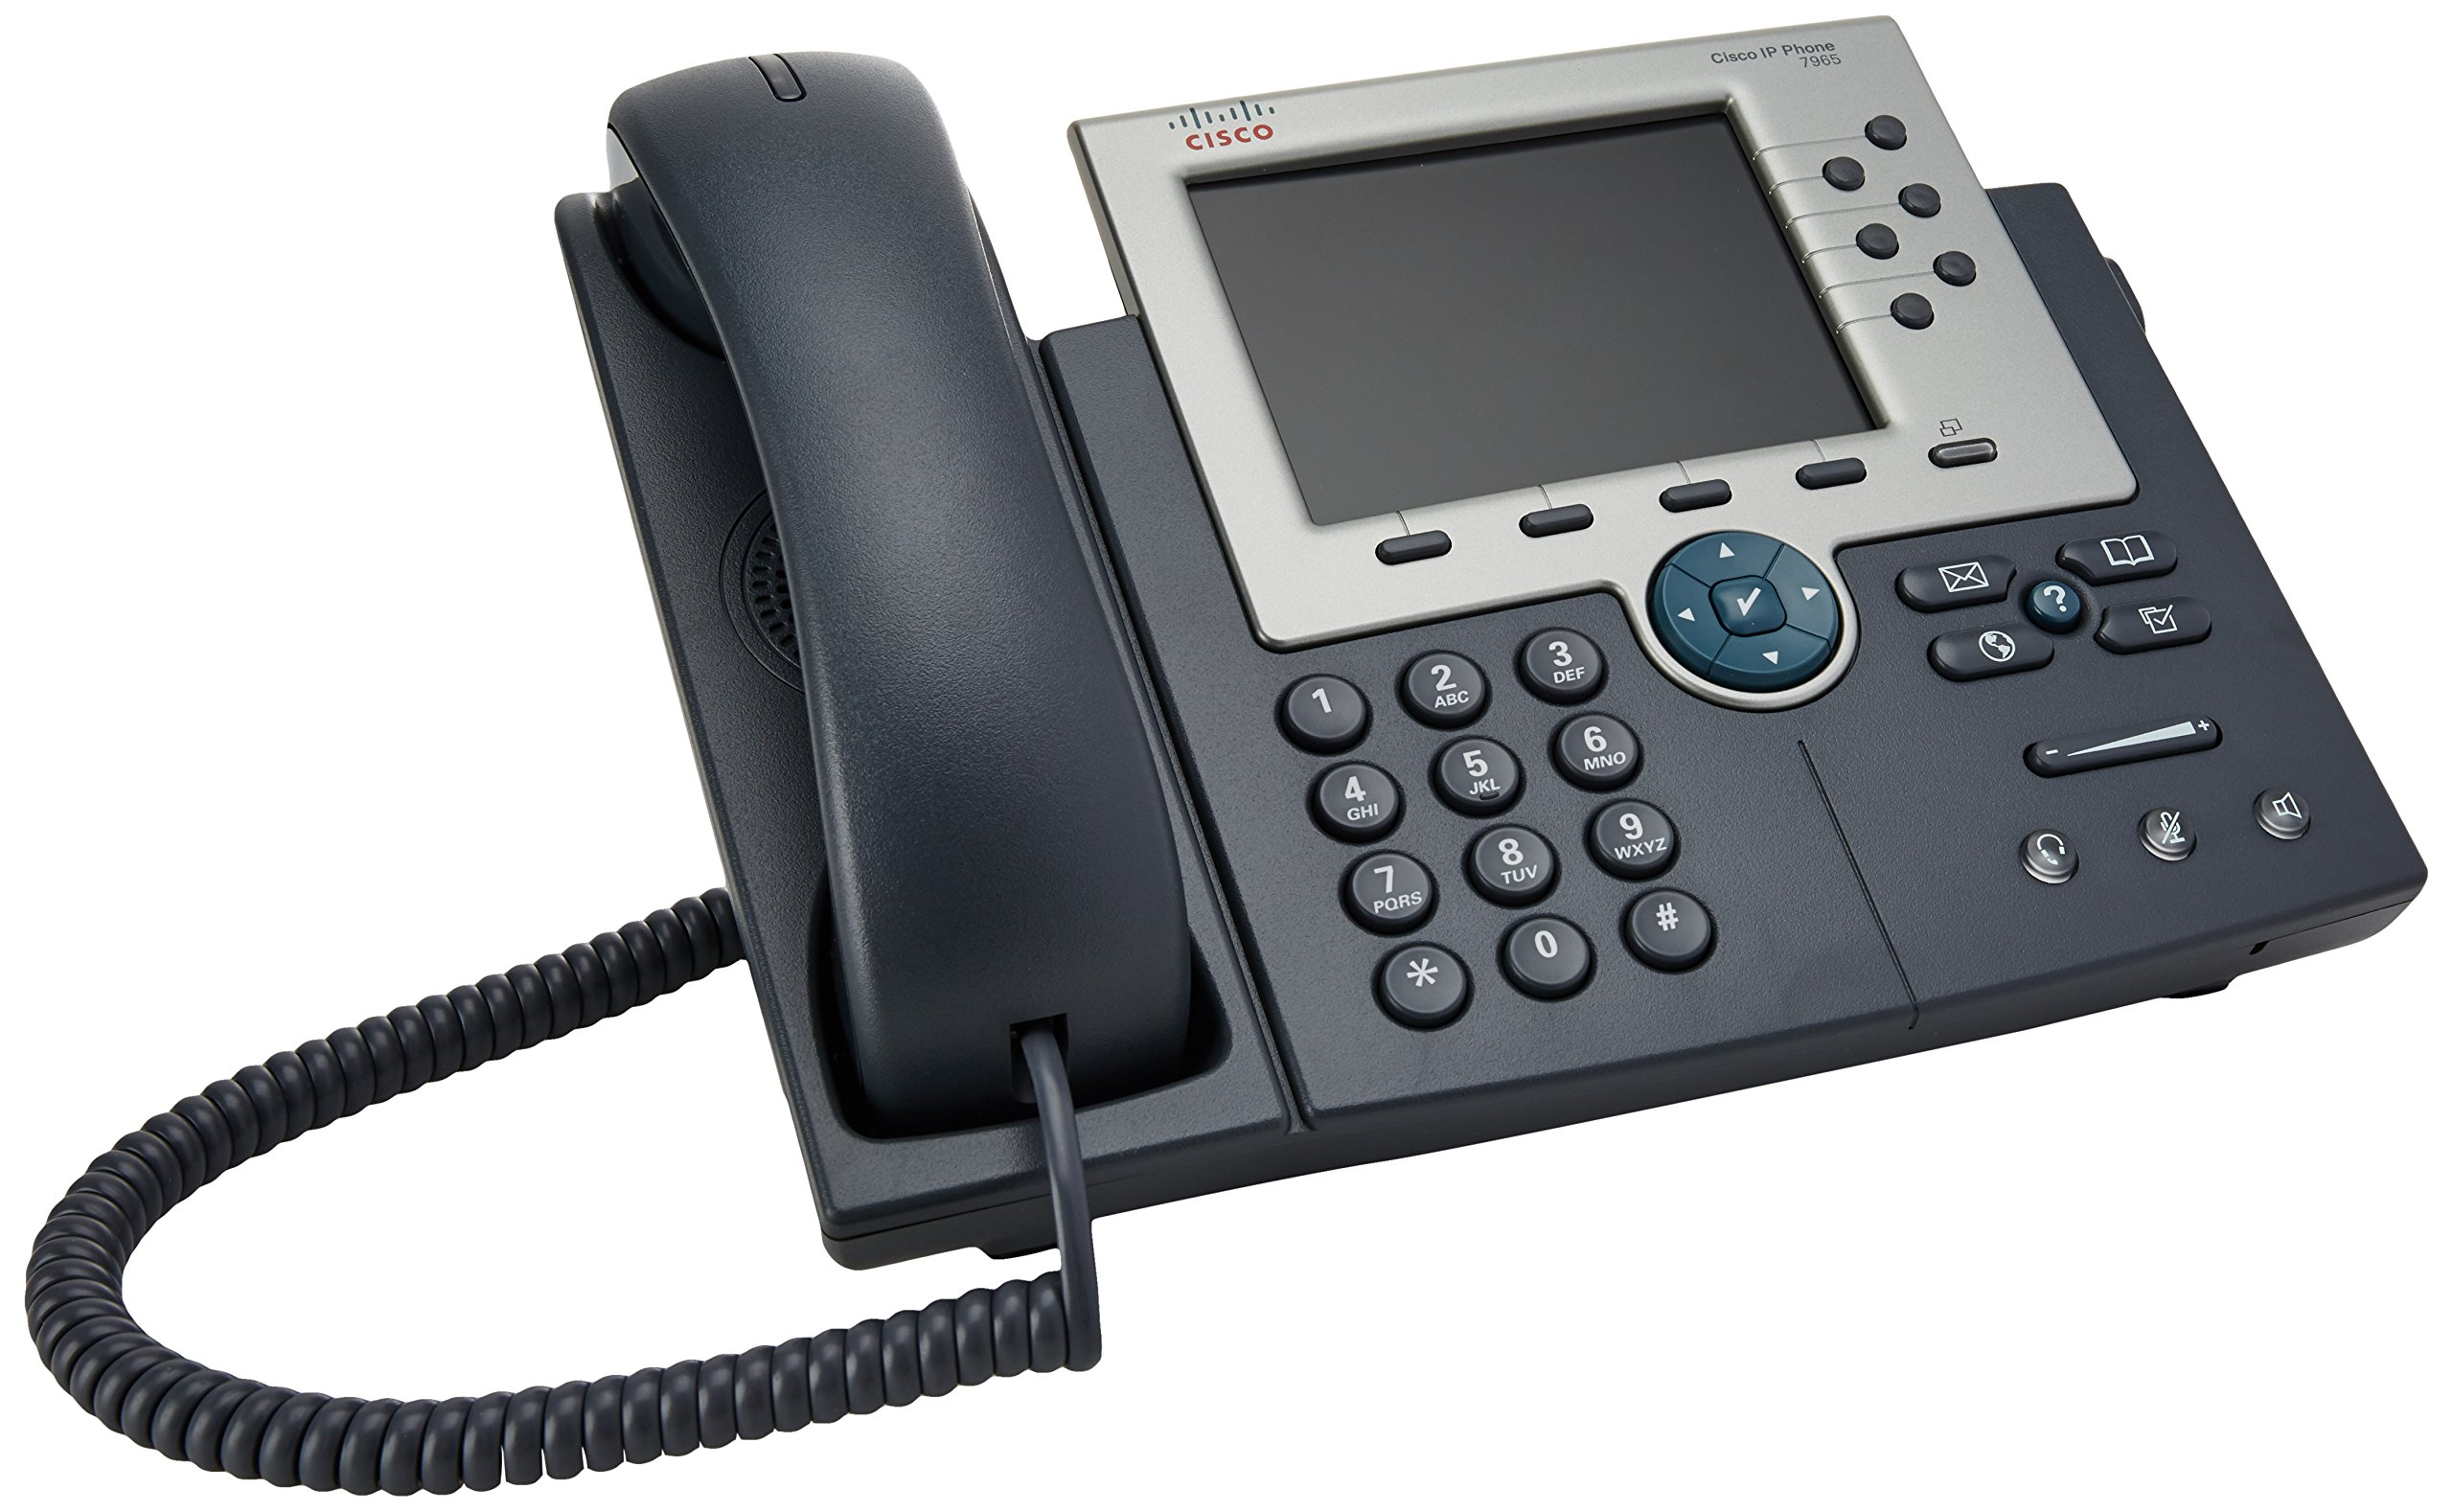 A common VoIP telephone